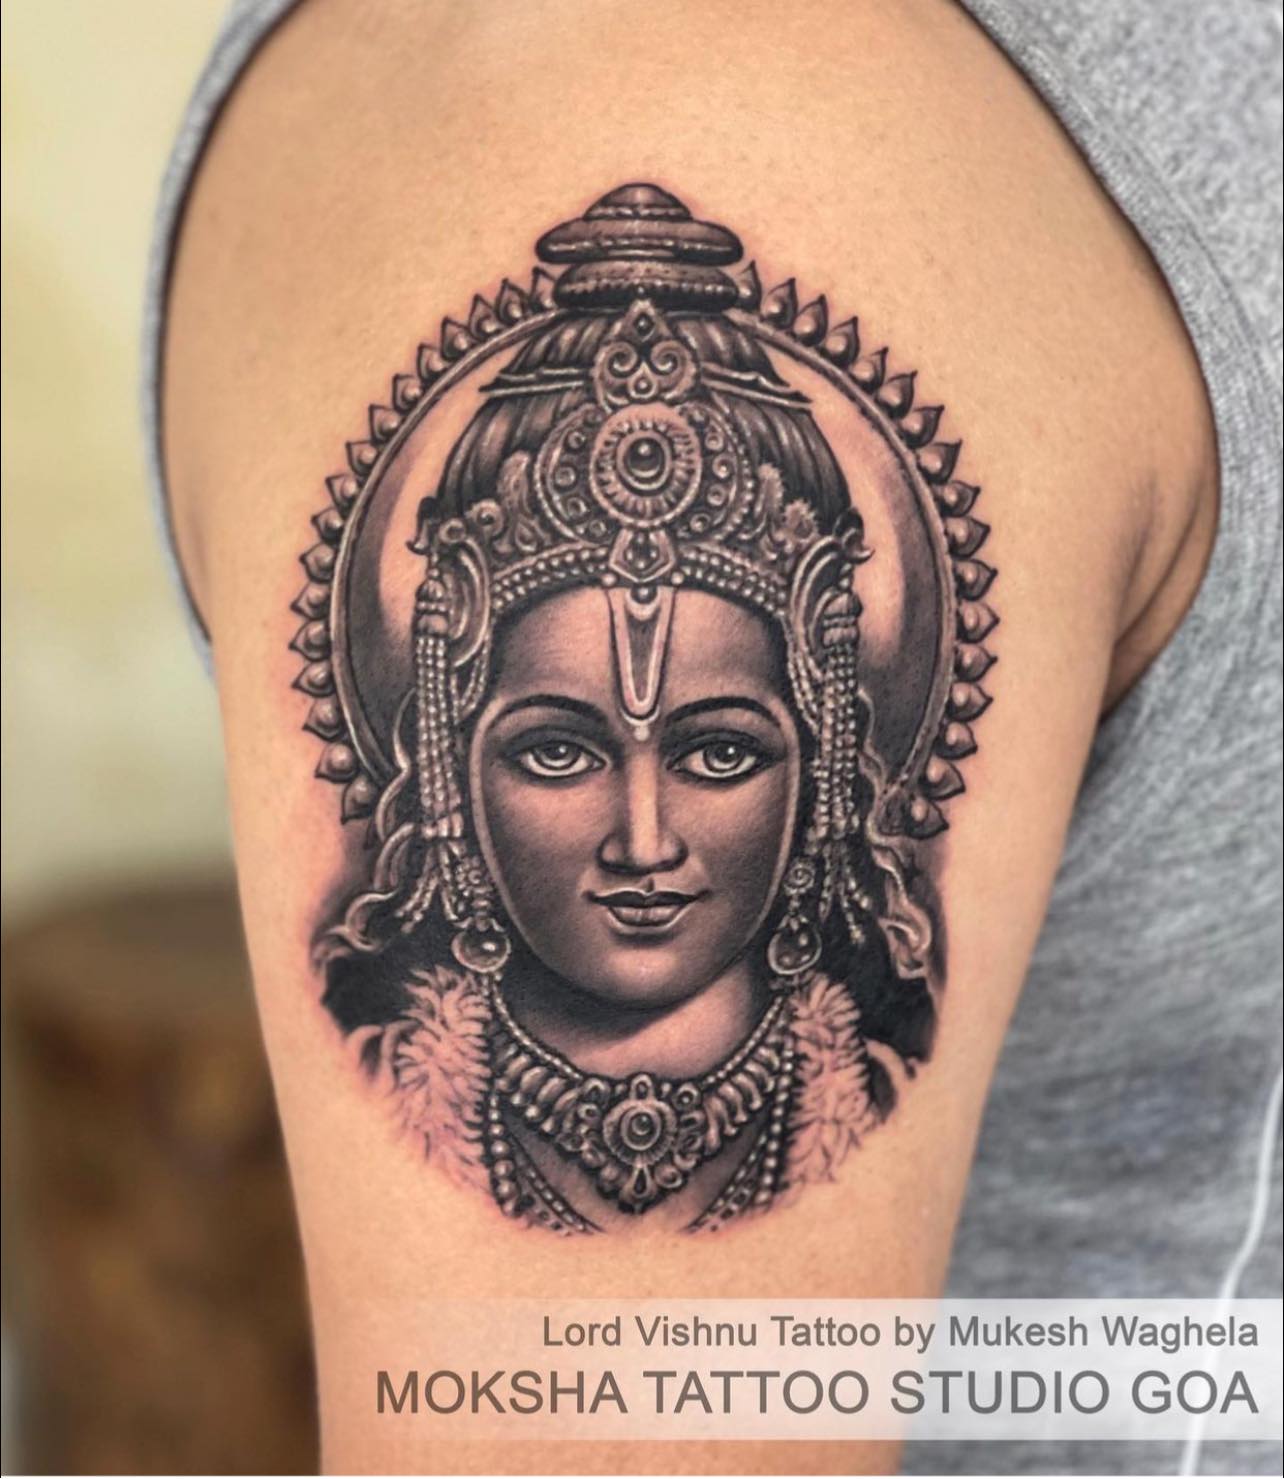 Unleash Your Body's Artistic Potential at Best Tattoo Studio in Goa